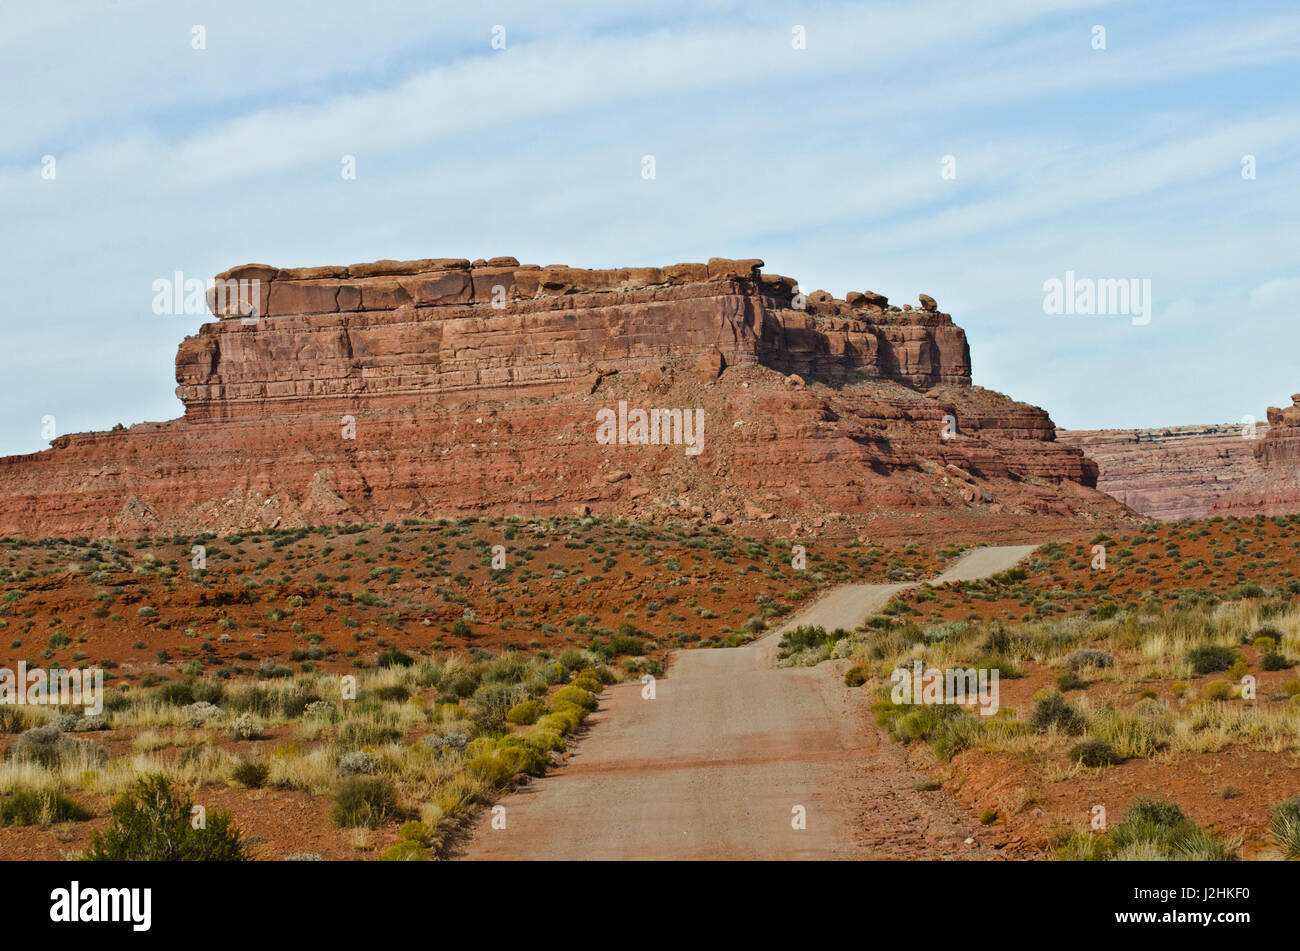 USA, Utah, Monticello, Roadway through Valley of the Gods, BLM Lands Stock Photo